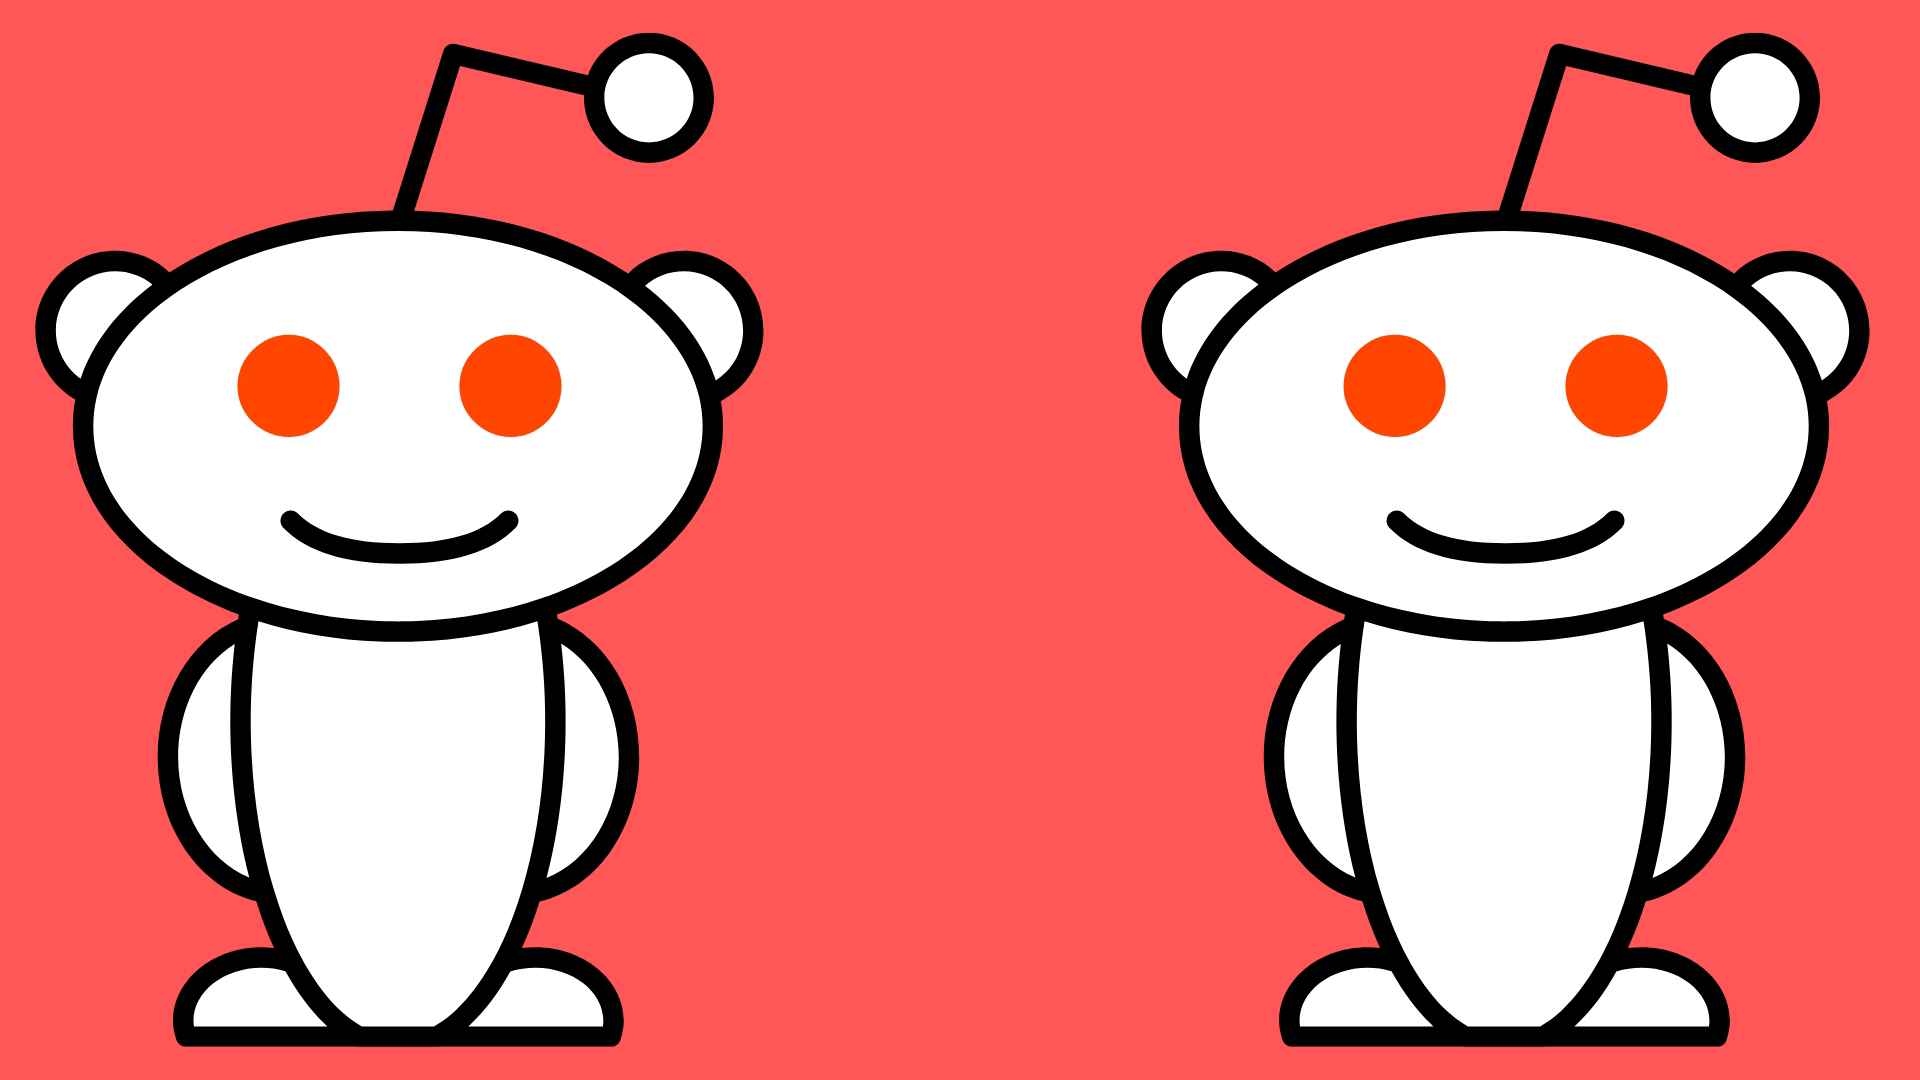 How can users identify trustworthy or credible information on Reddit?